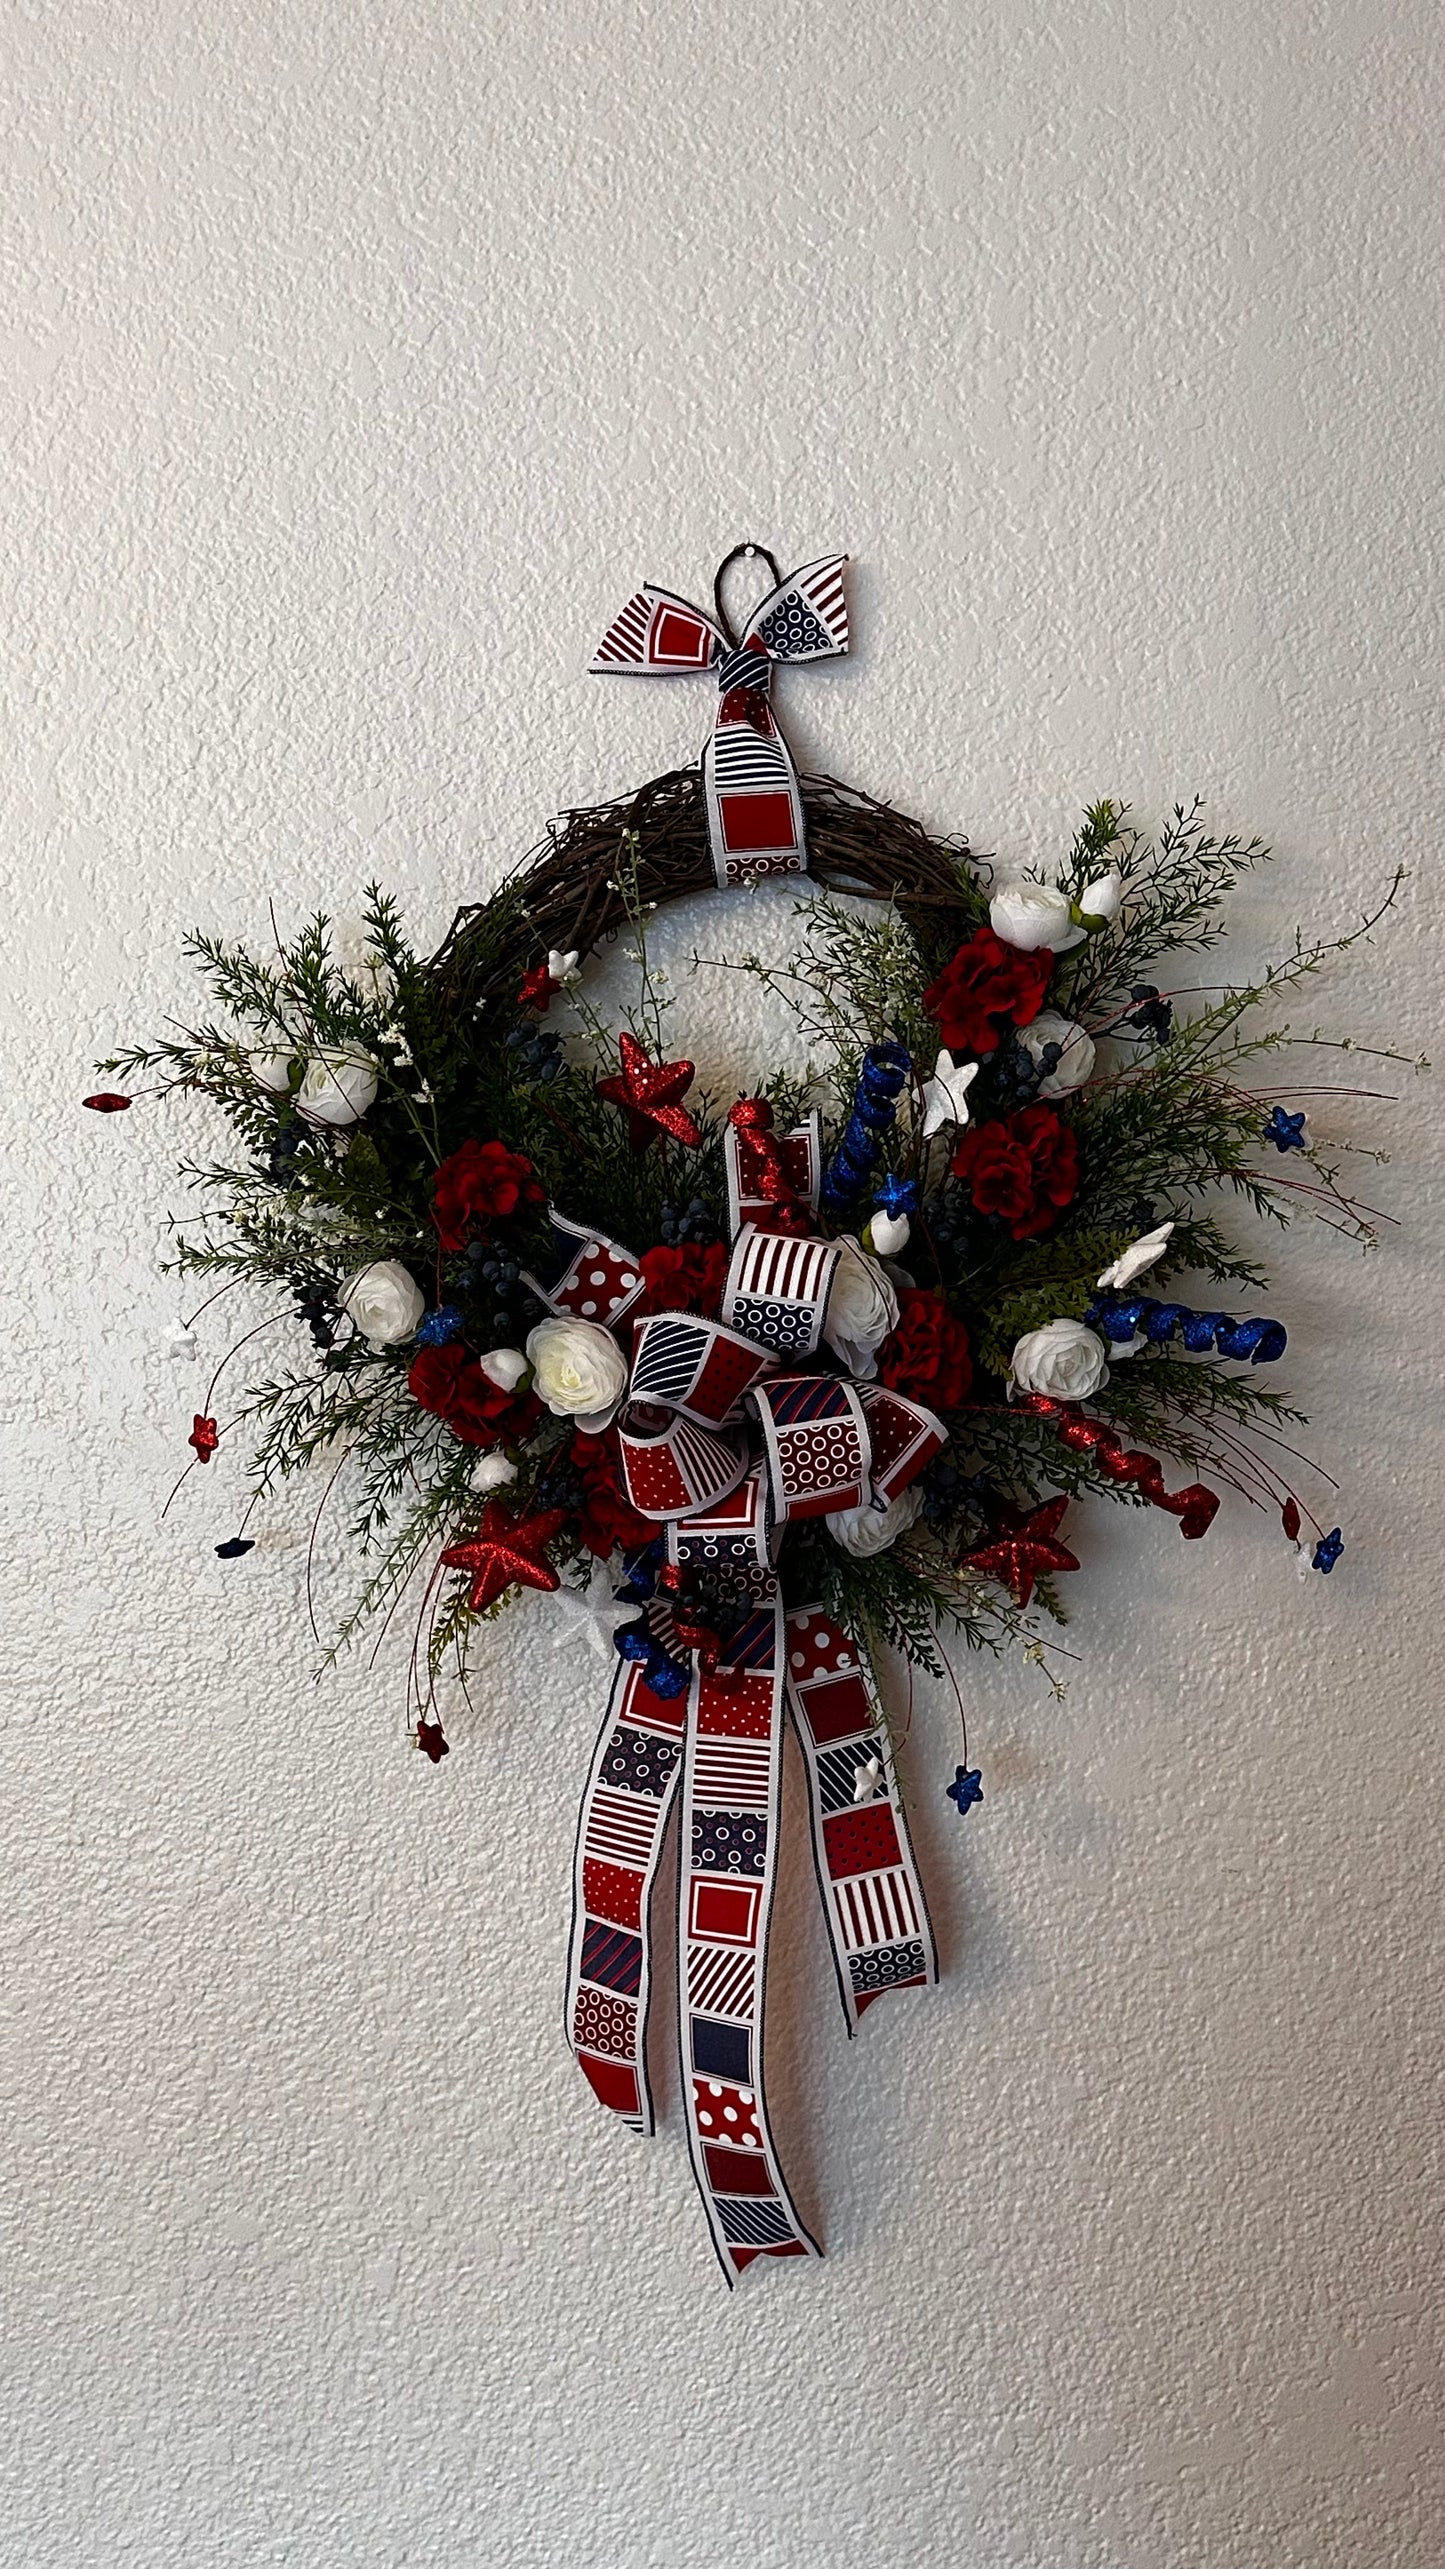 Wreath - Patriotic with Fireworks